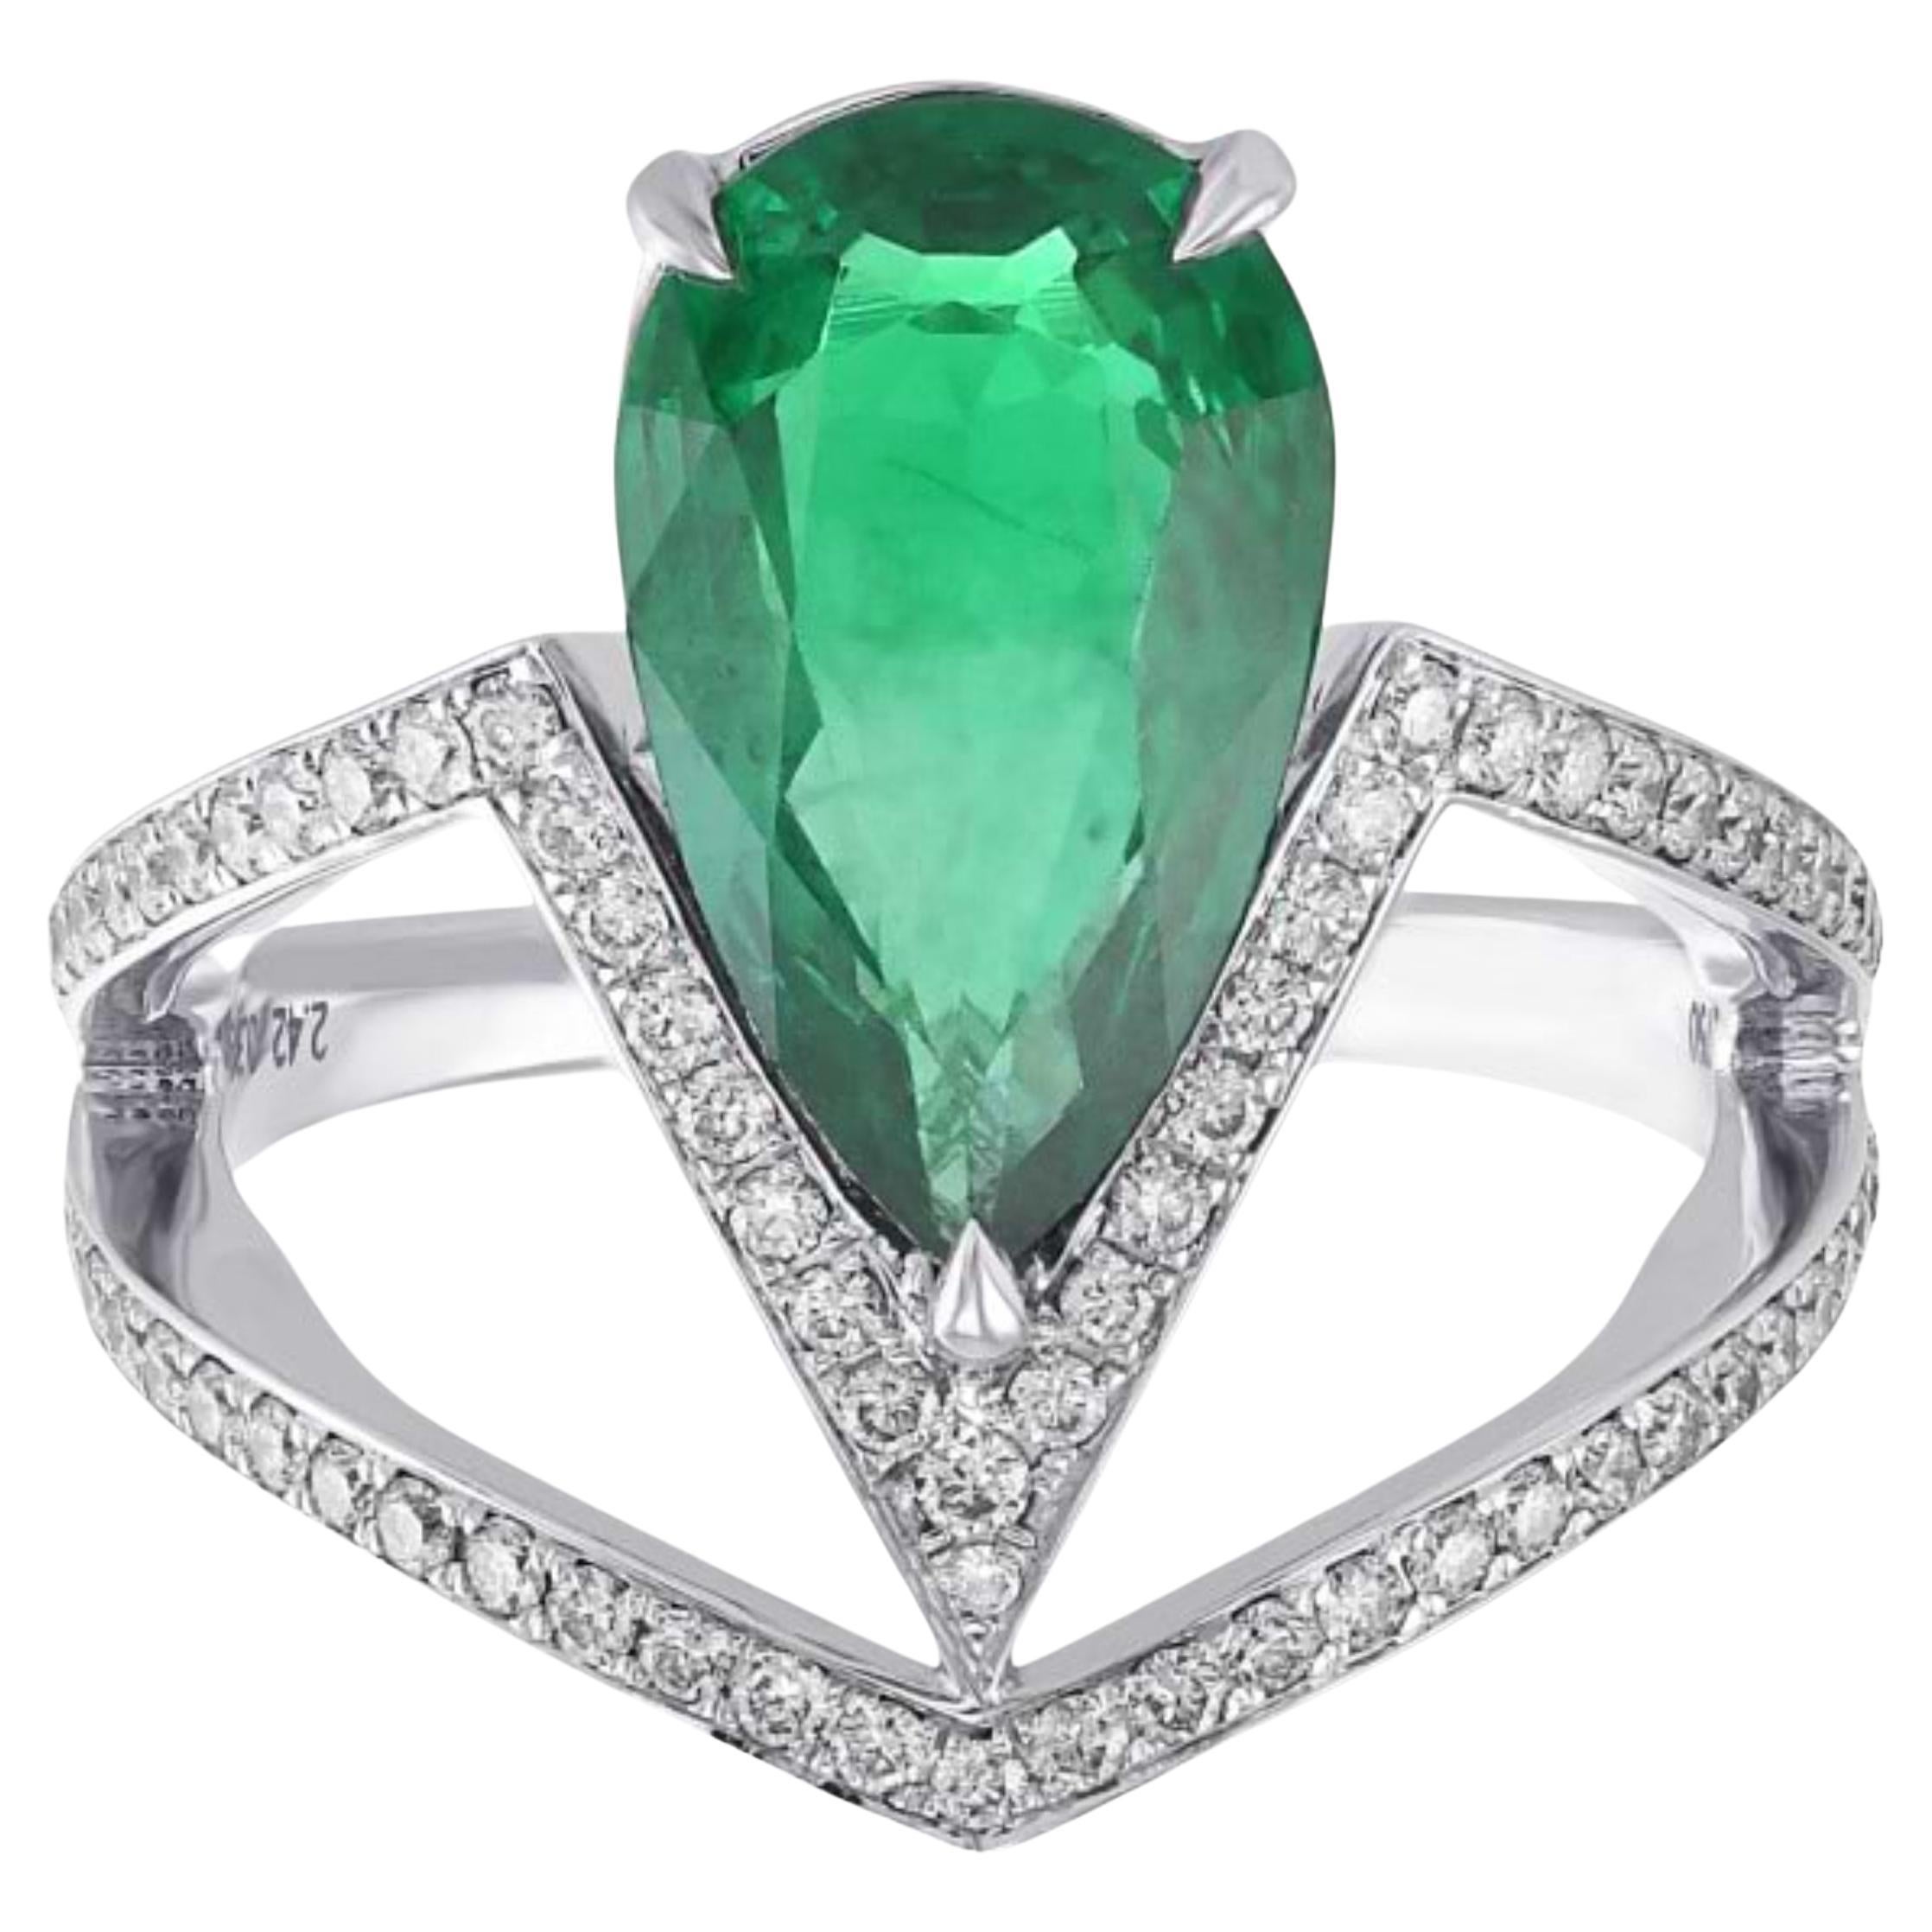 Art Deco Style 2.55 Carat Pear Cut Natural Emerald Diamond Cocktail Ring Band For Sale